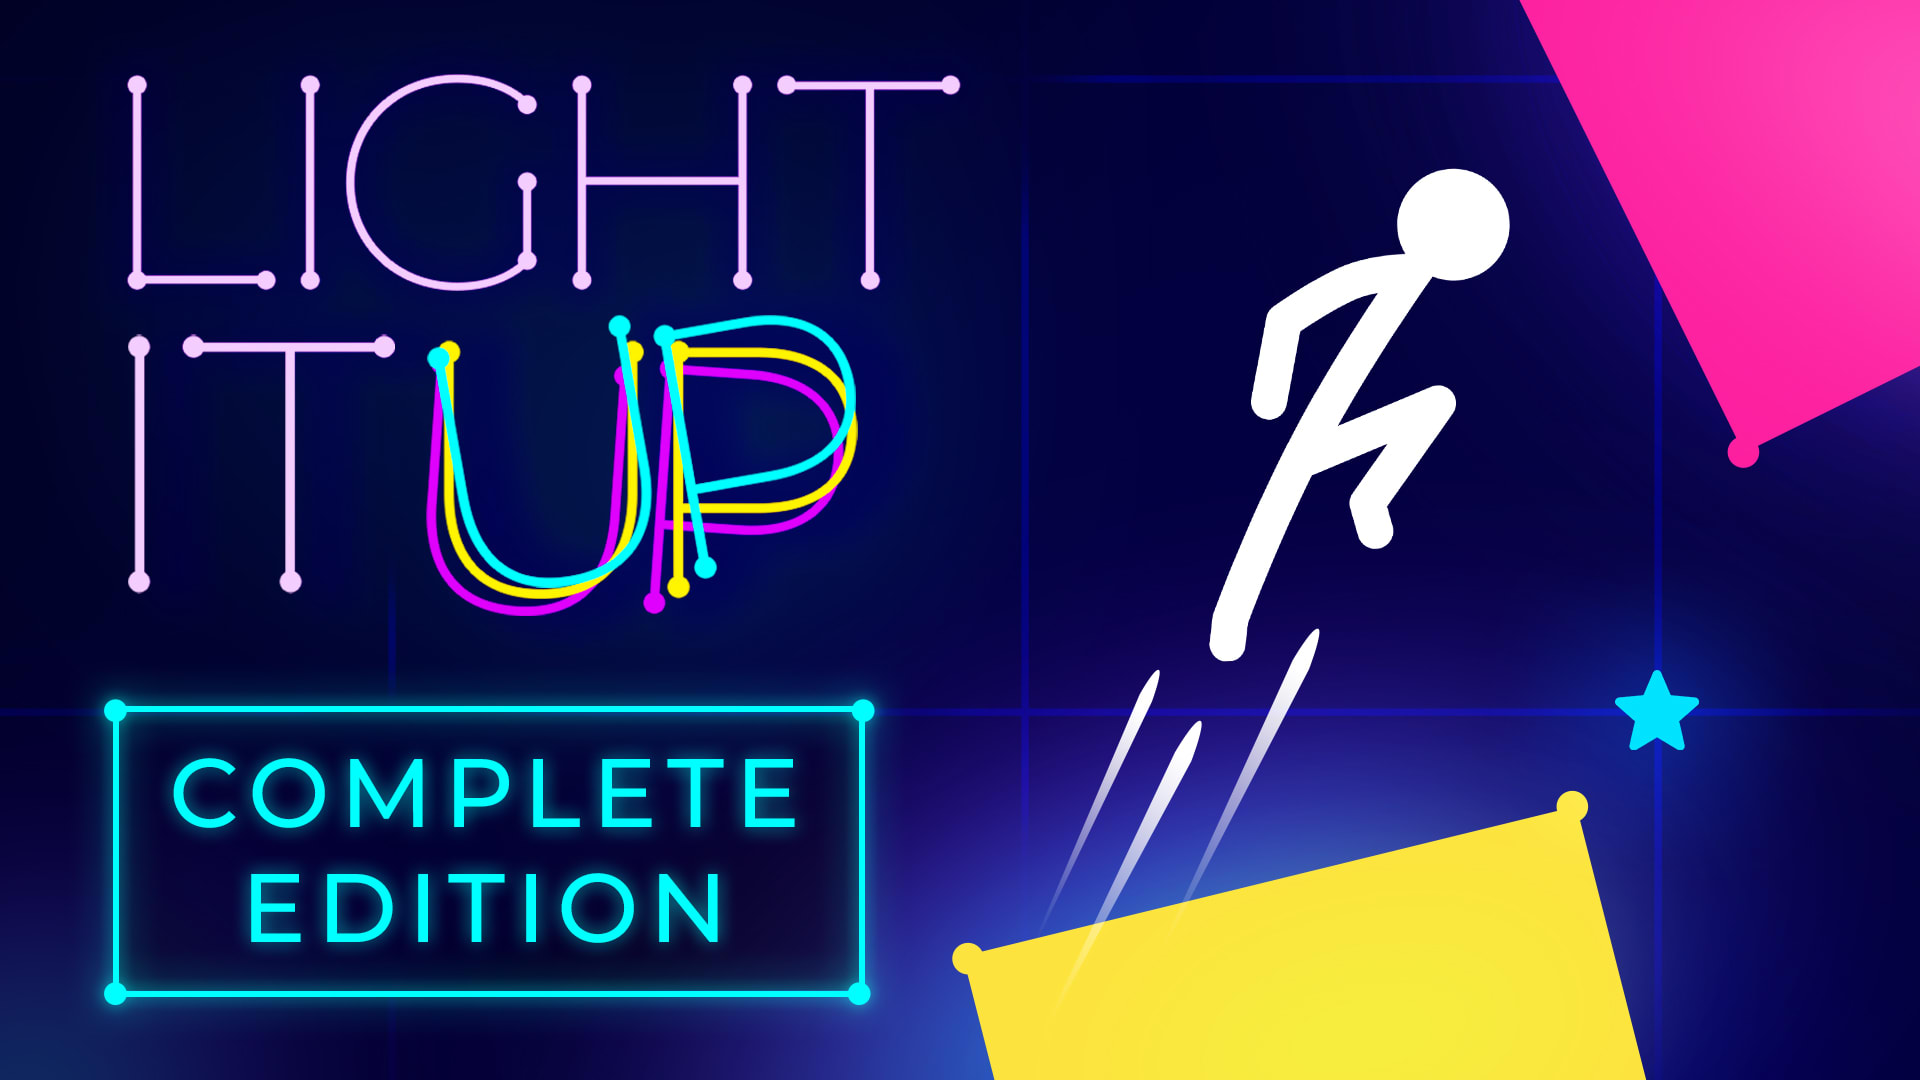 Light-It Up: Complete Edition